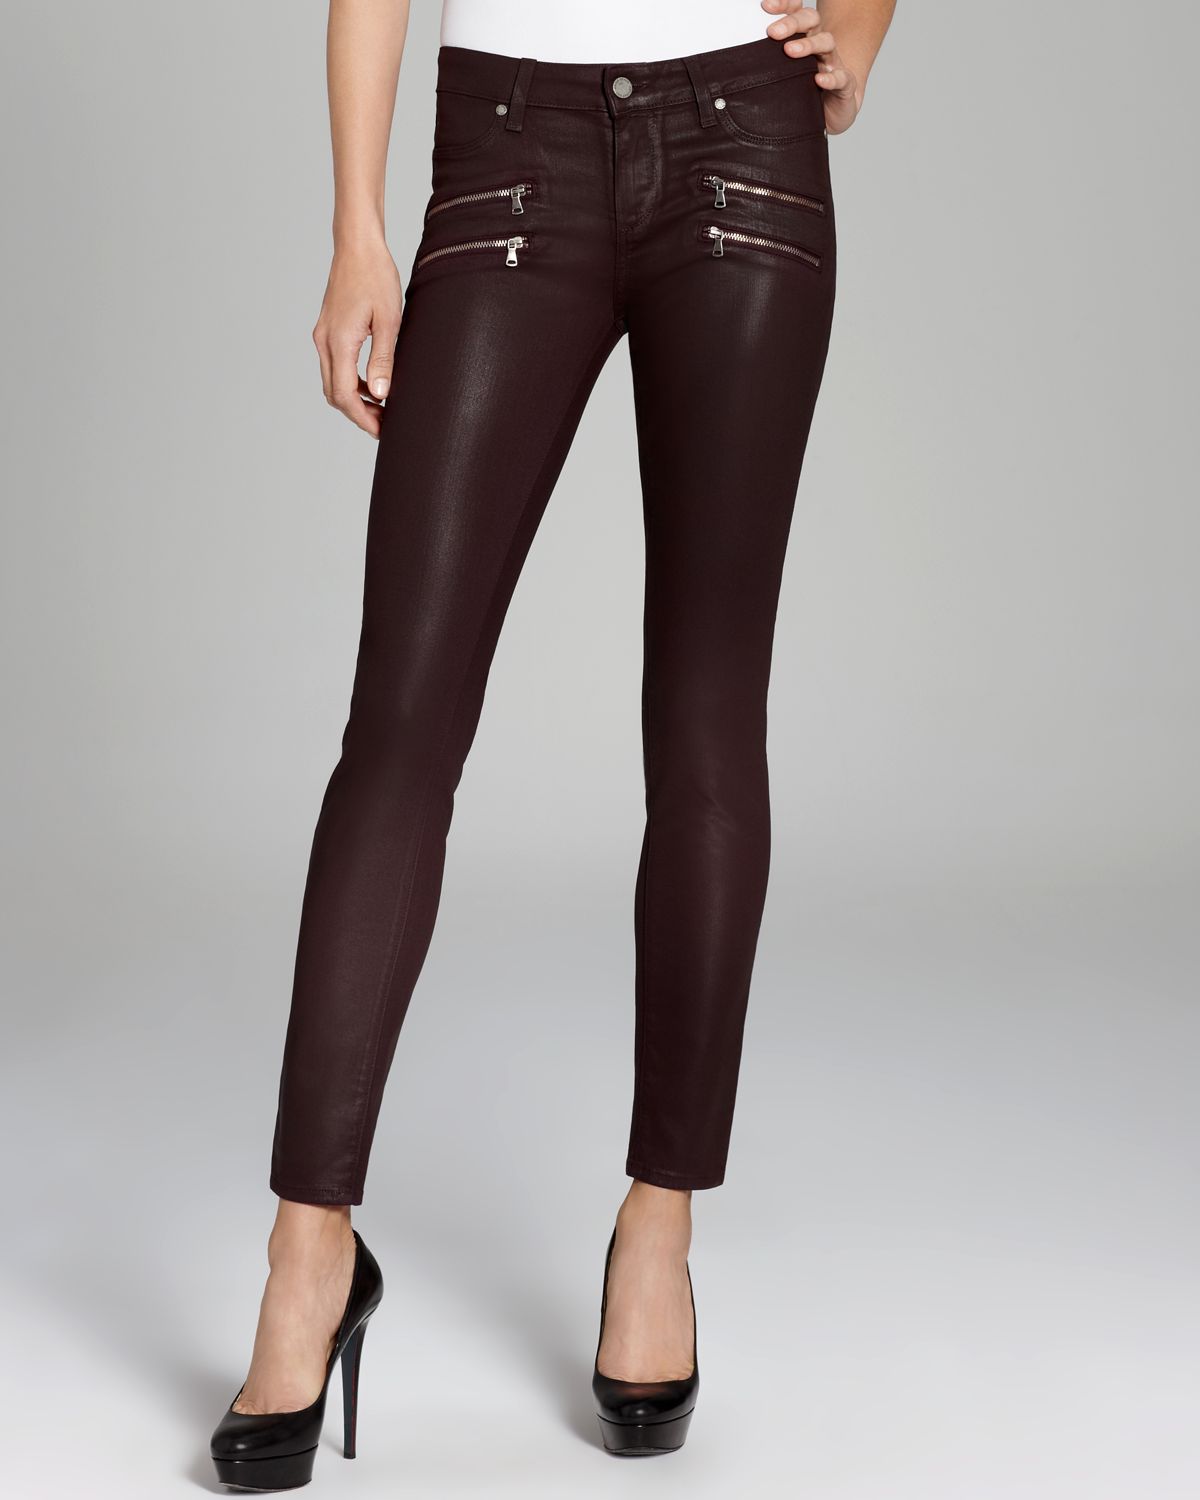 Paige Jeans Edgemont Coated Skinny in Black Cherry in Brown (Black ...